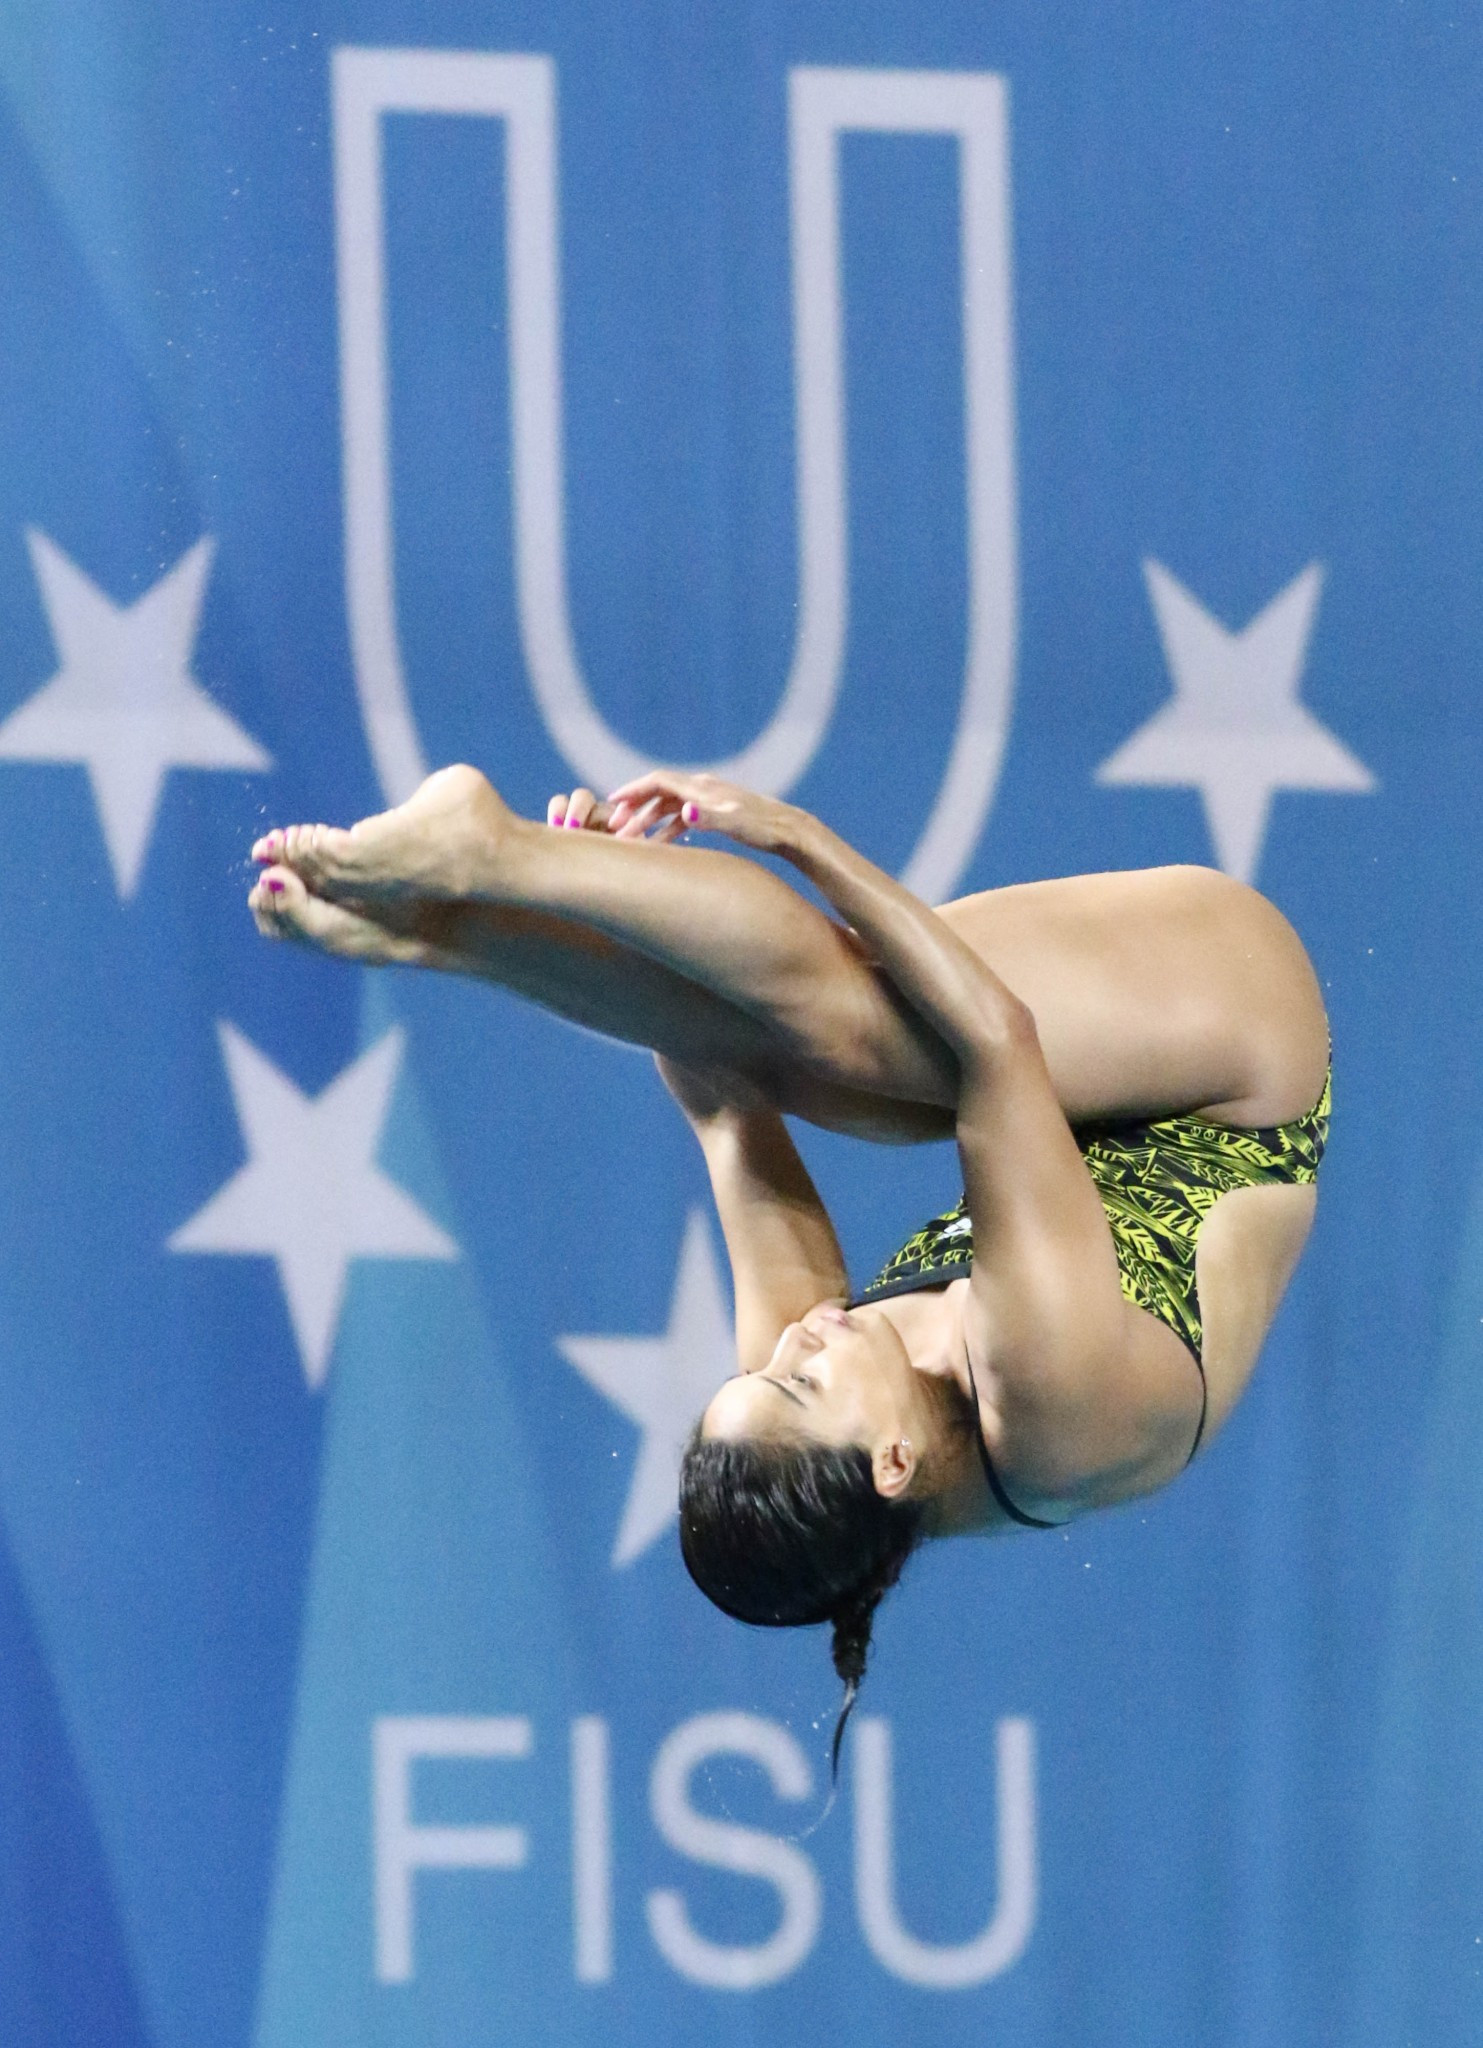 Mexico's Arantxa Chavez claimed the gold medal in the women's 3m springboard final ©Taipei 2017